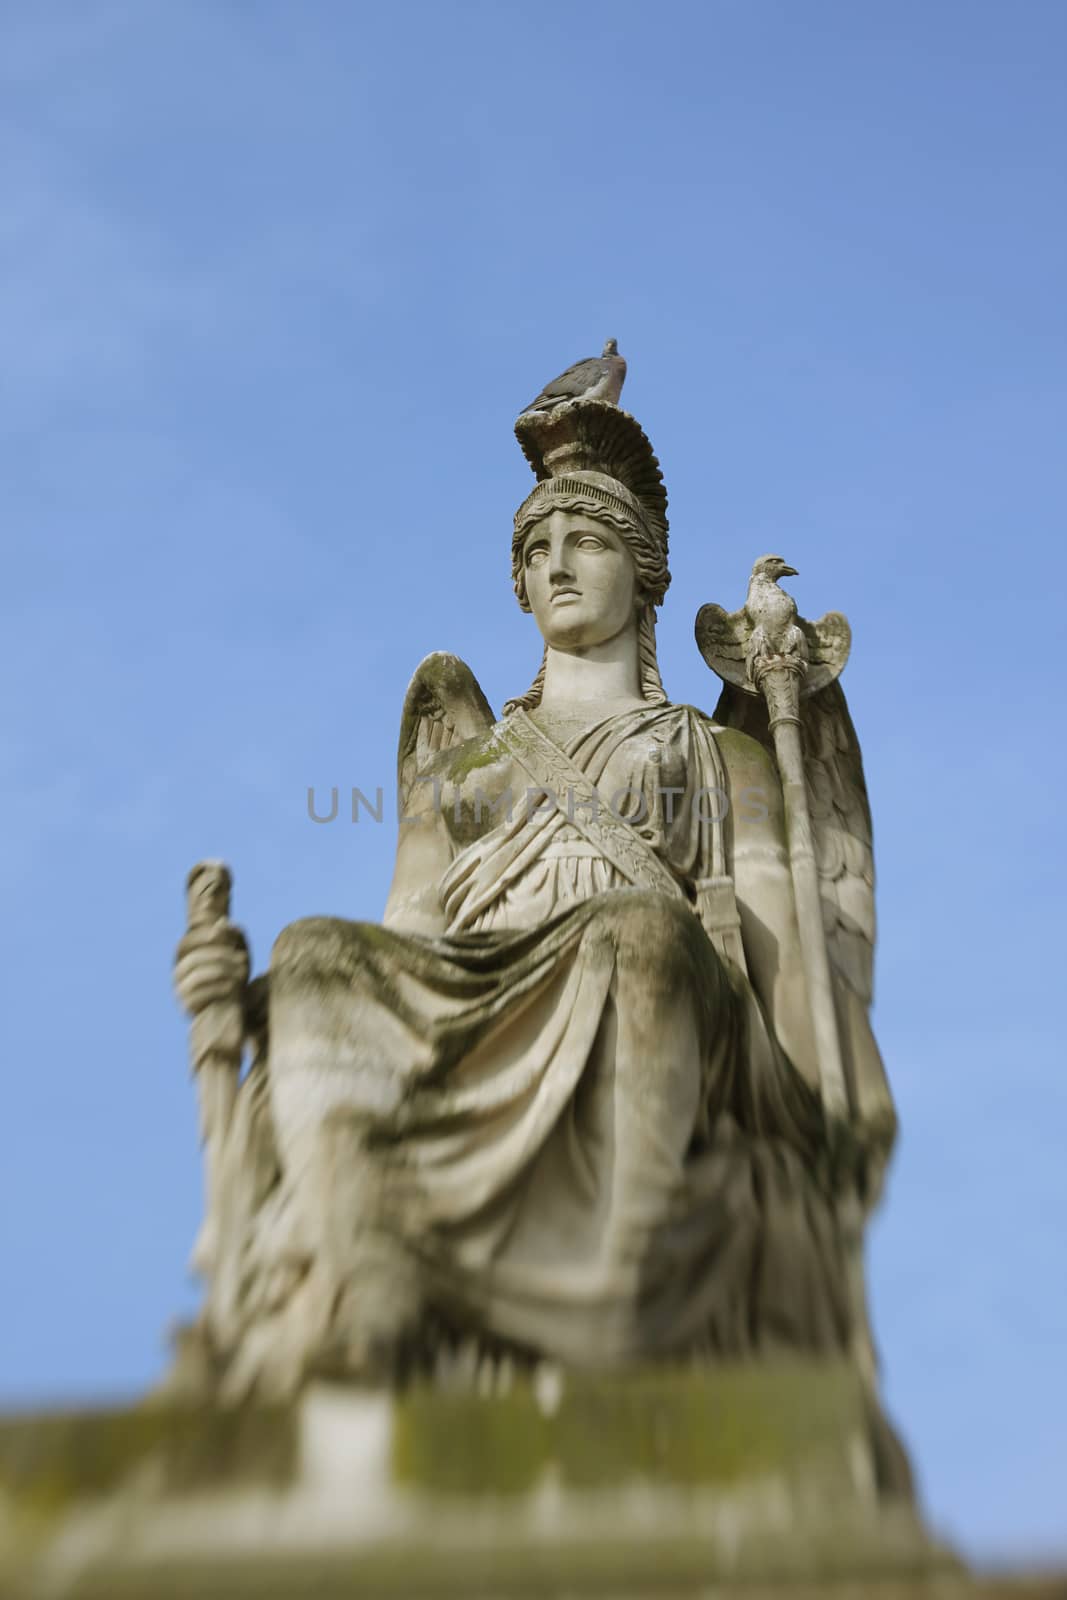 Detail of statue near a Louvre Carrousel Triumph Arch with pigeon on the head (made with lensbaby)